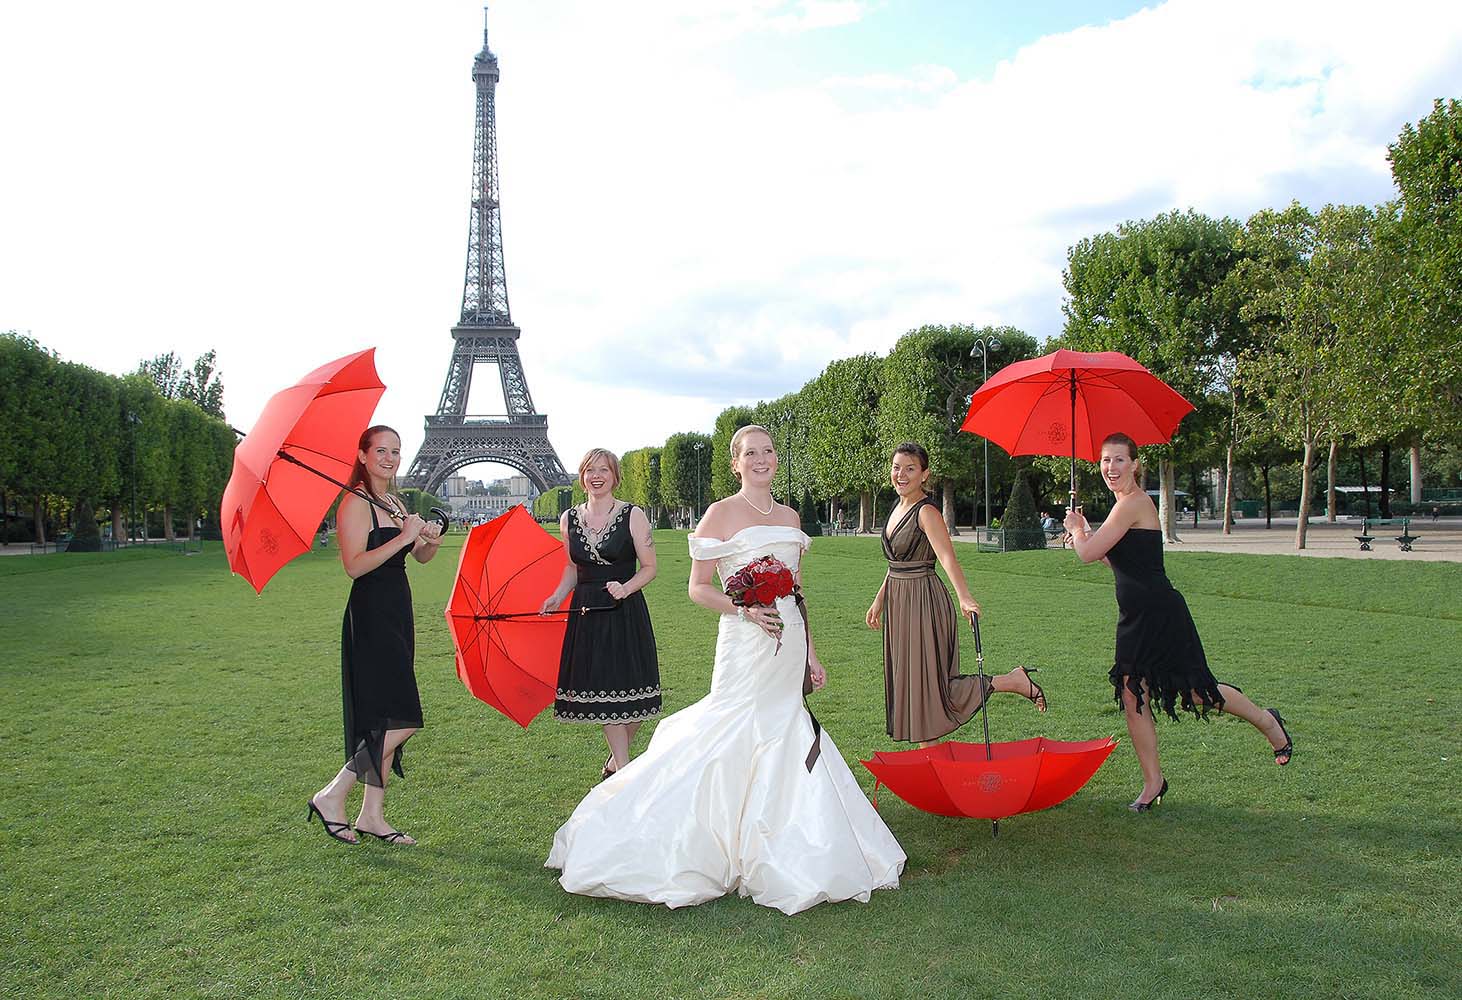 Wedding with bride, guests and red umbrellas, Eiffel Tower gardens, Paris, France